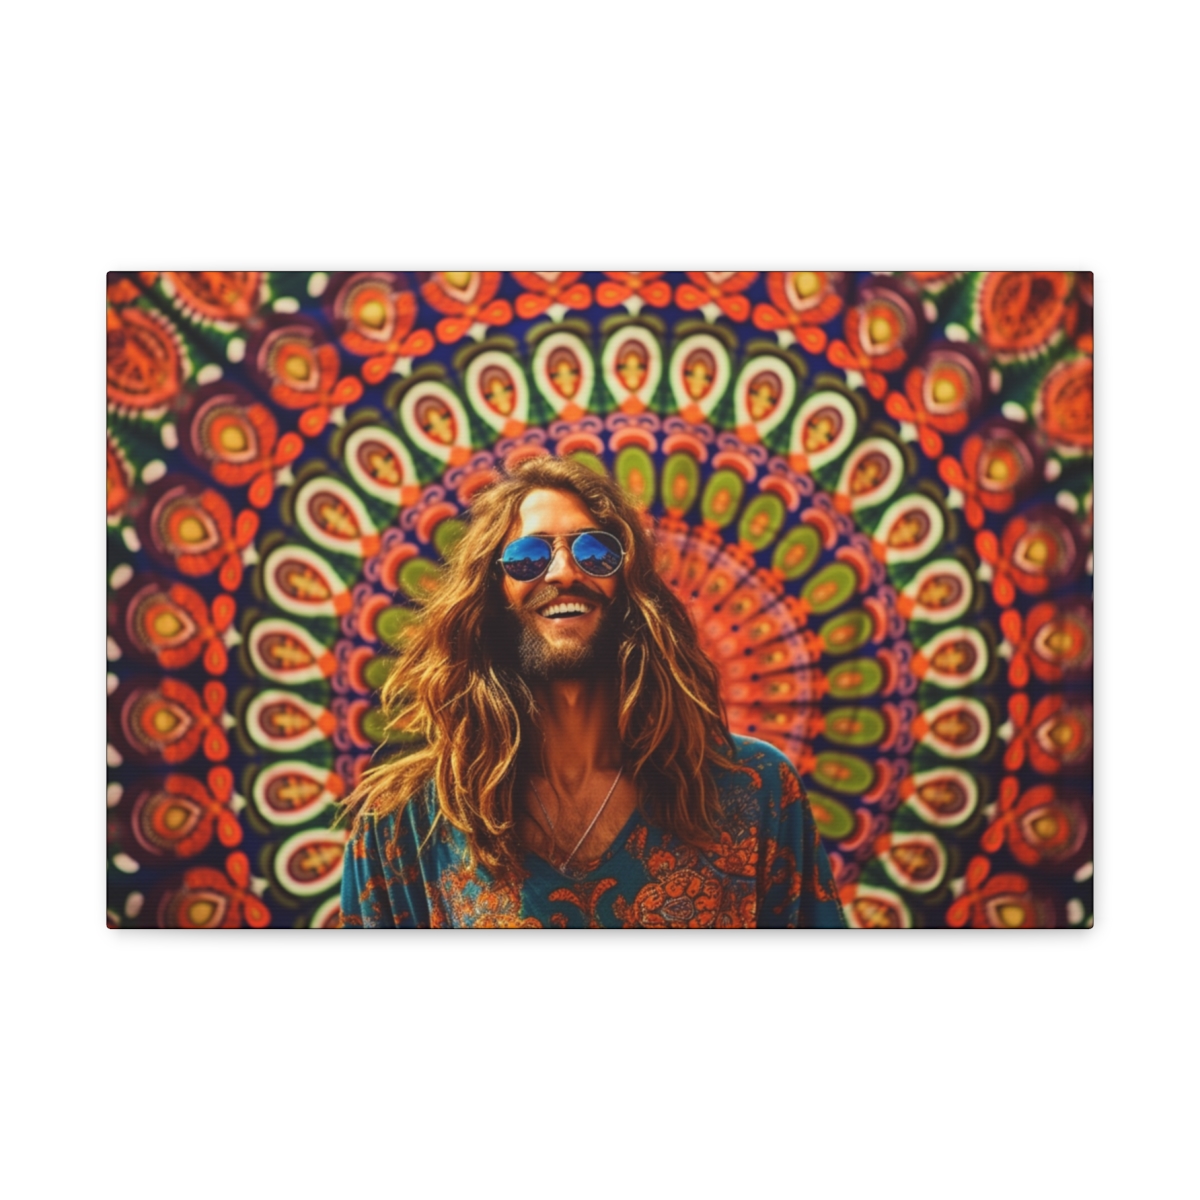 Hippie Psychedelic Wall Art: The Bloom Of Wisdom